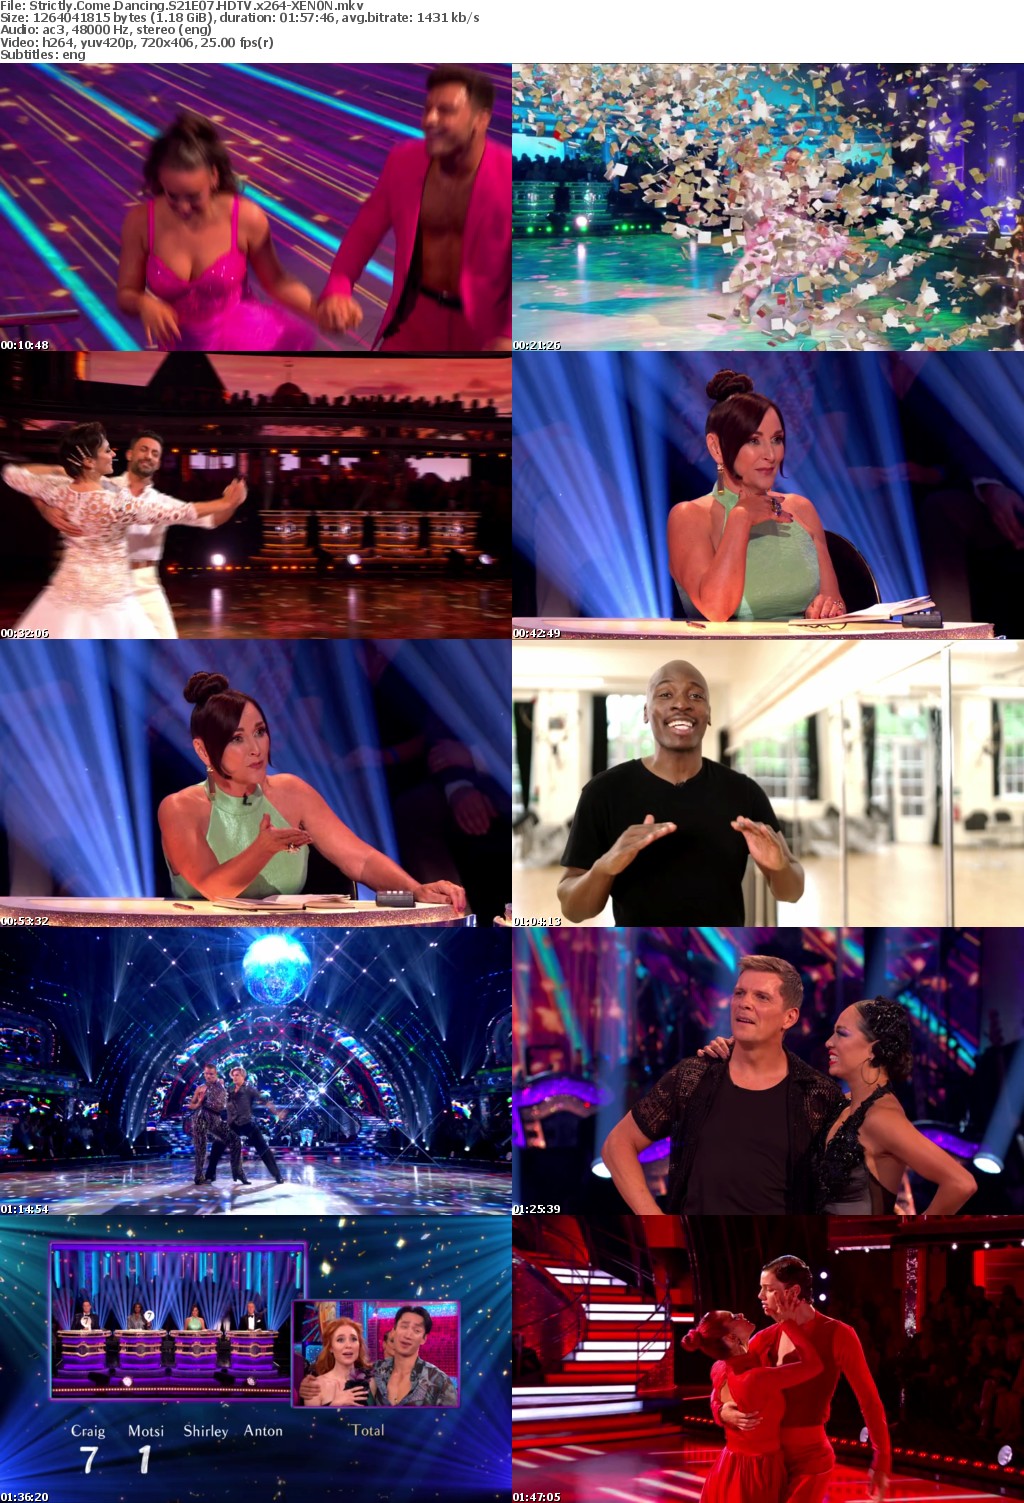 Strictly Come Dancing S21E07 HDTV x264-XEN0N Saturn5